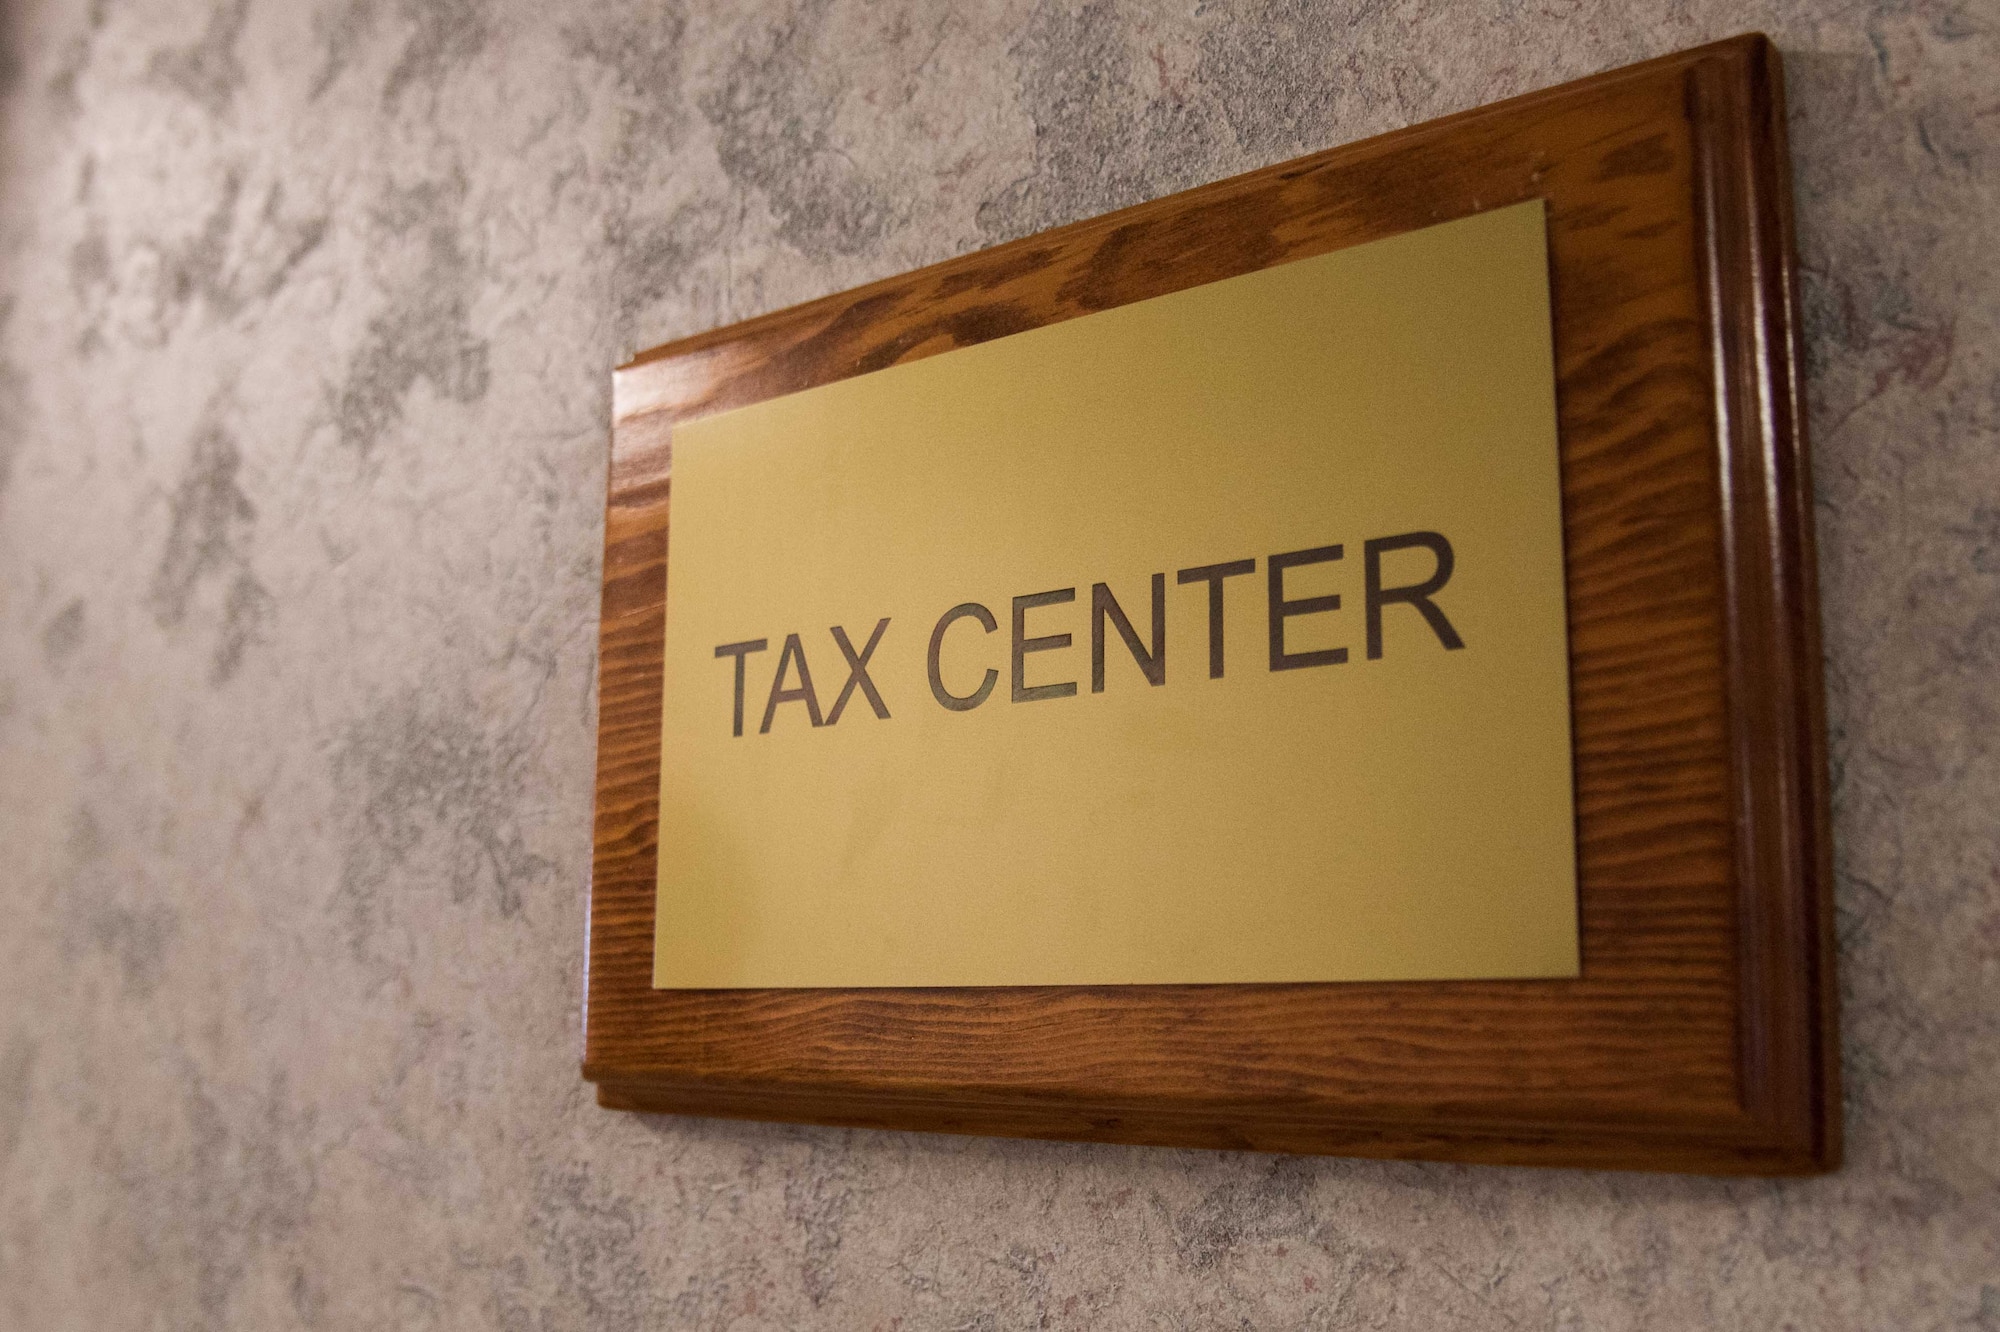 The McConnell Air Force Base, Kansas, Tax Center is open Monday-Friday until mid-April, from 8 a.m. to 4 p.m. and is located in building 750. To make an appointment at the tax center, call (316) 759-2487. (U.S. Air Force photo by Senior Airman Alexi Bosarge)